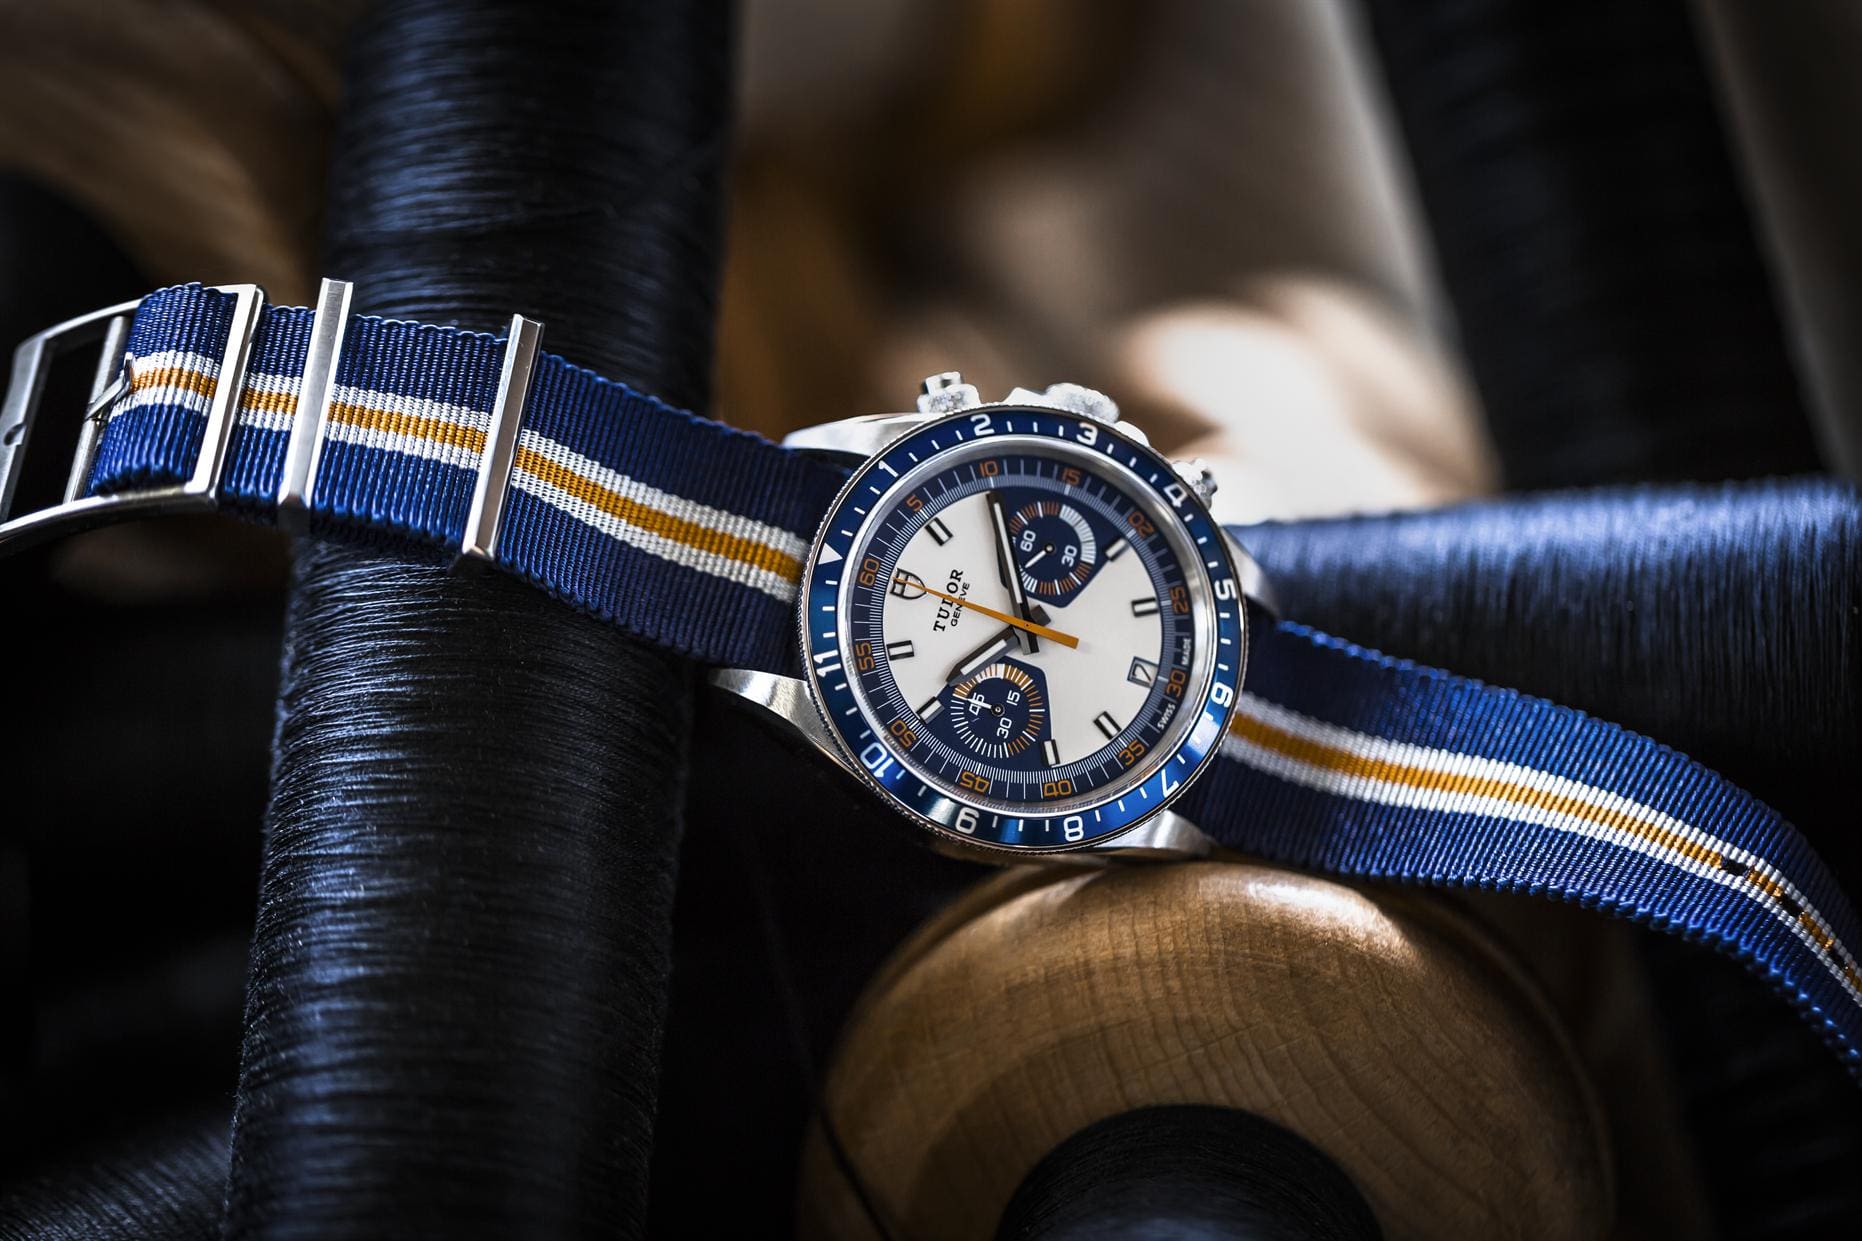 INSIGHT: The making of Tudor’s fabric watch straps